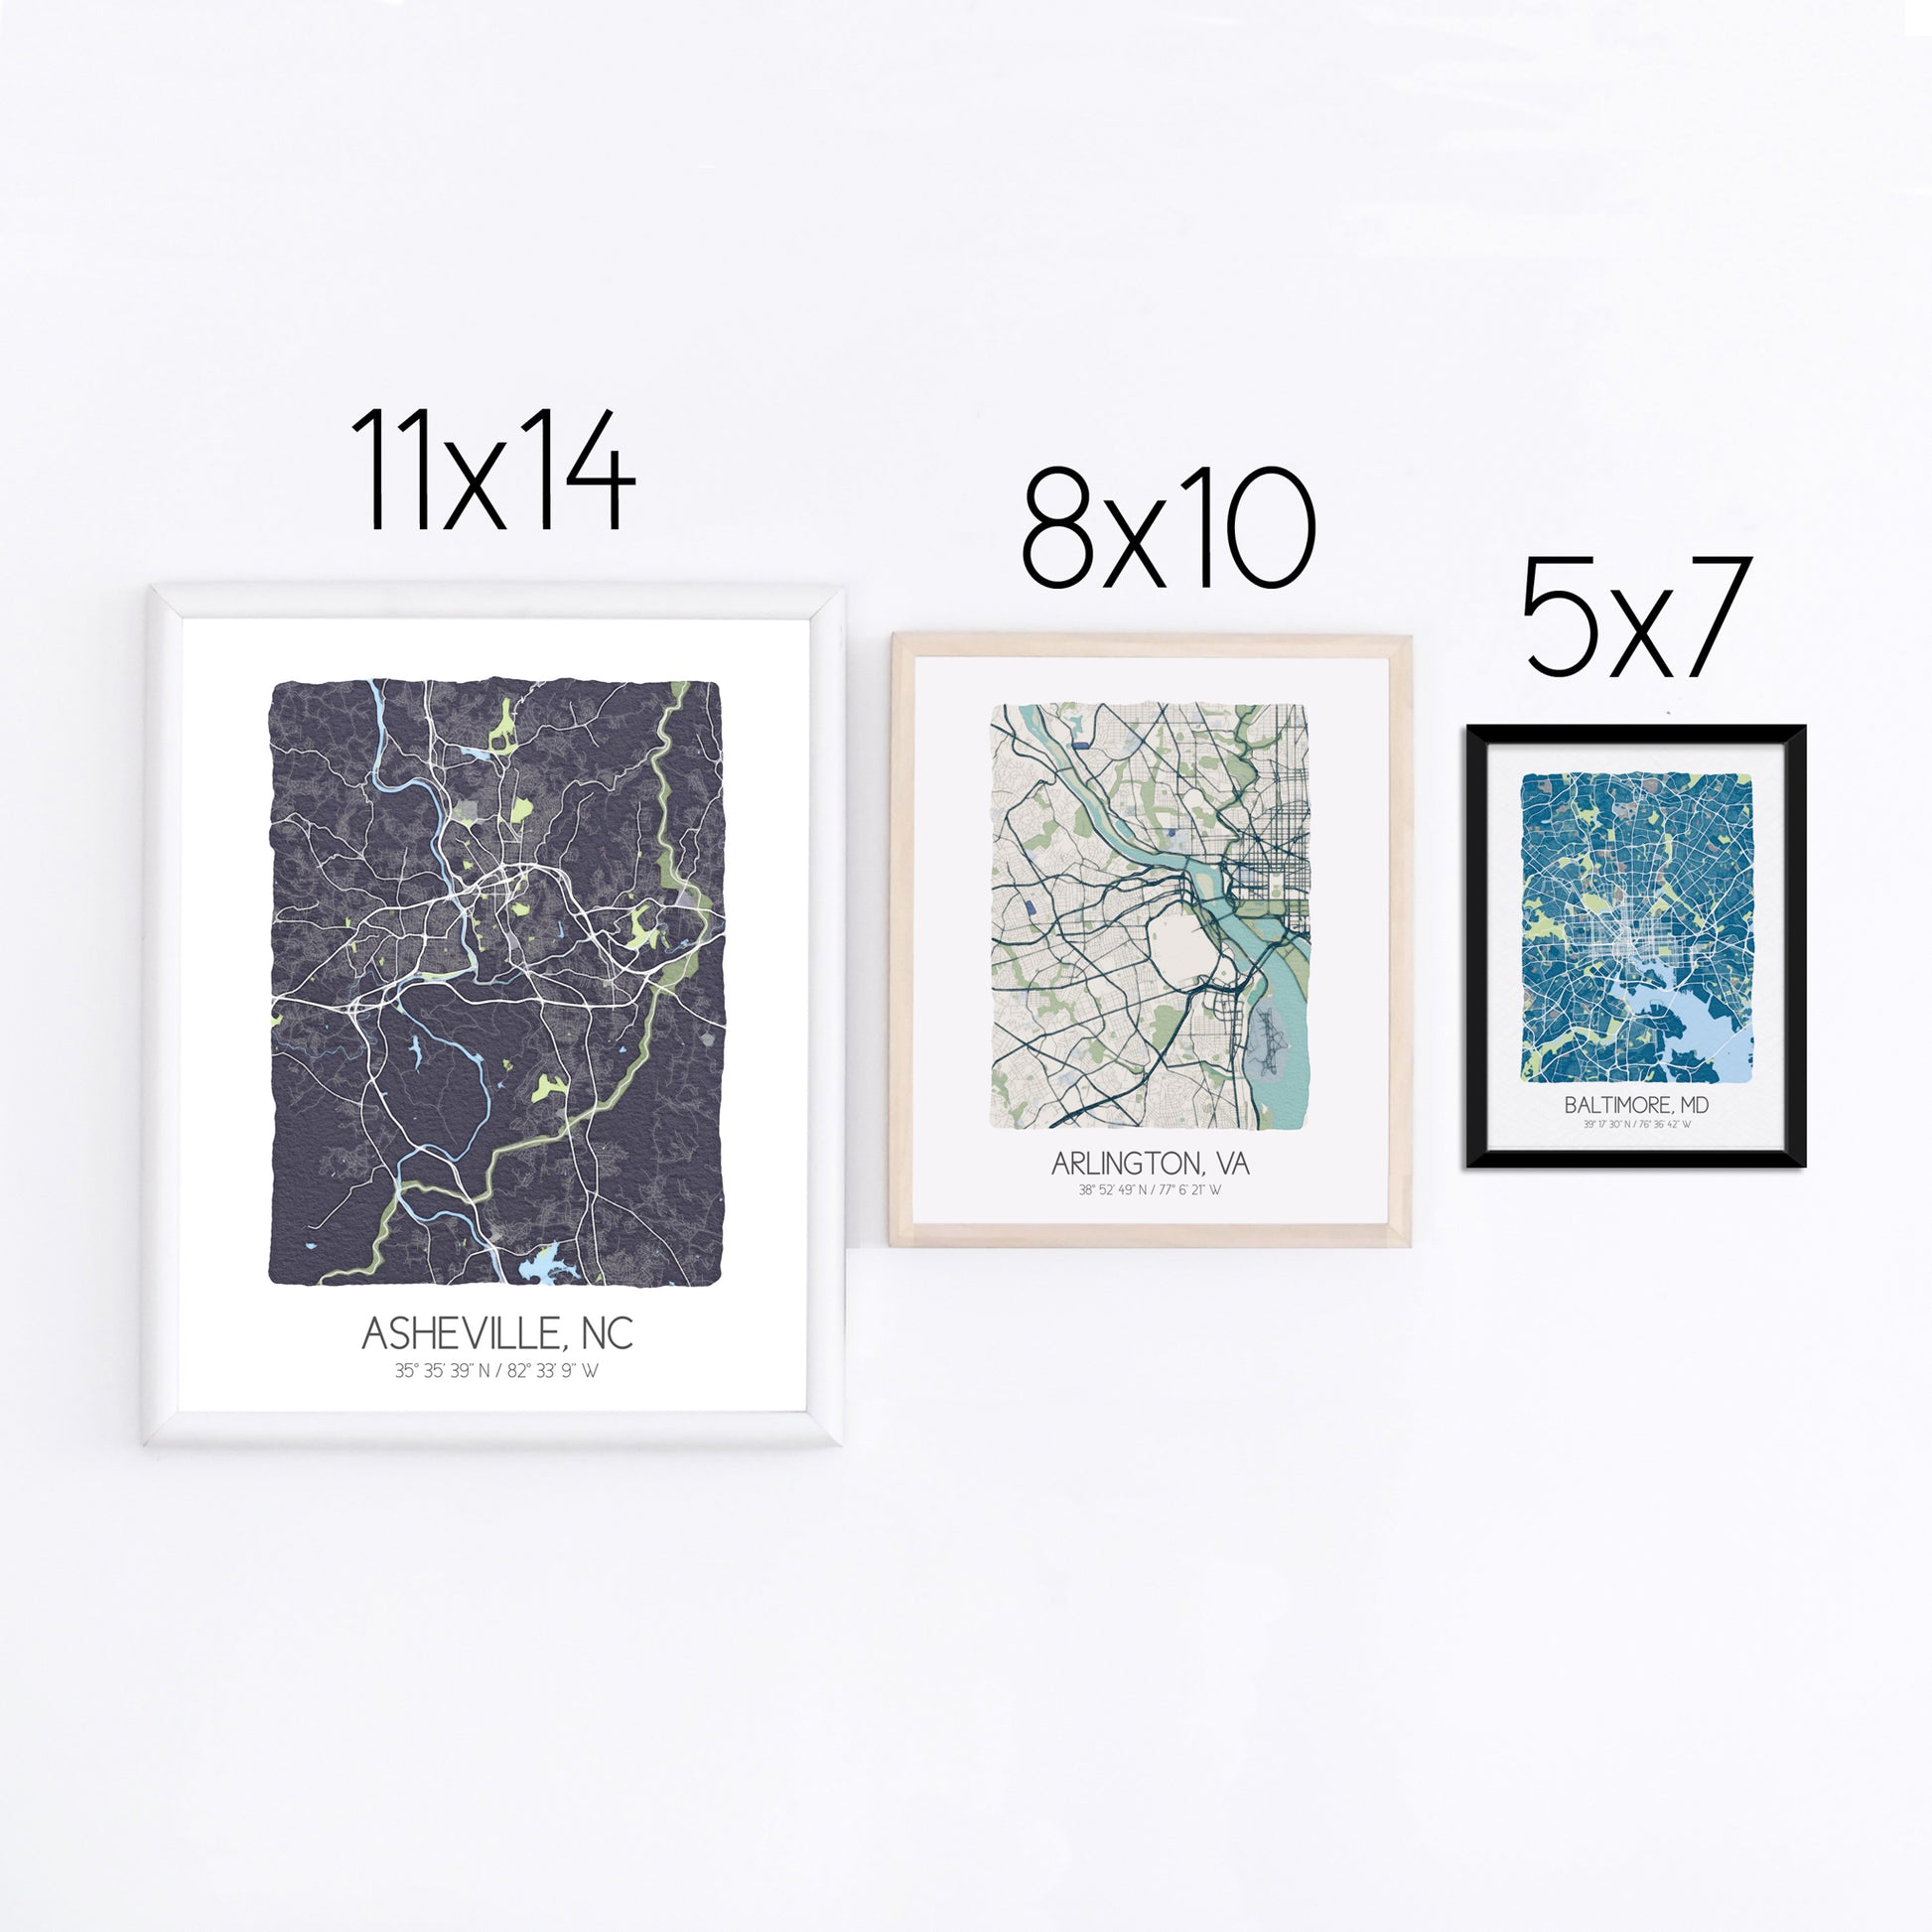 Three city map prints on a wall in in three different sizes - 11x14, 8x10, and 5x7